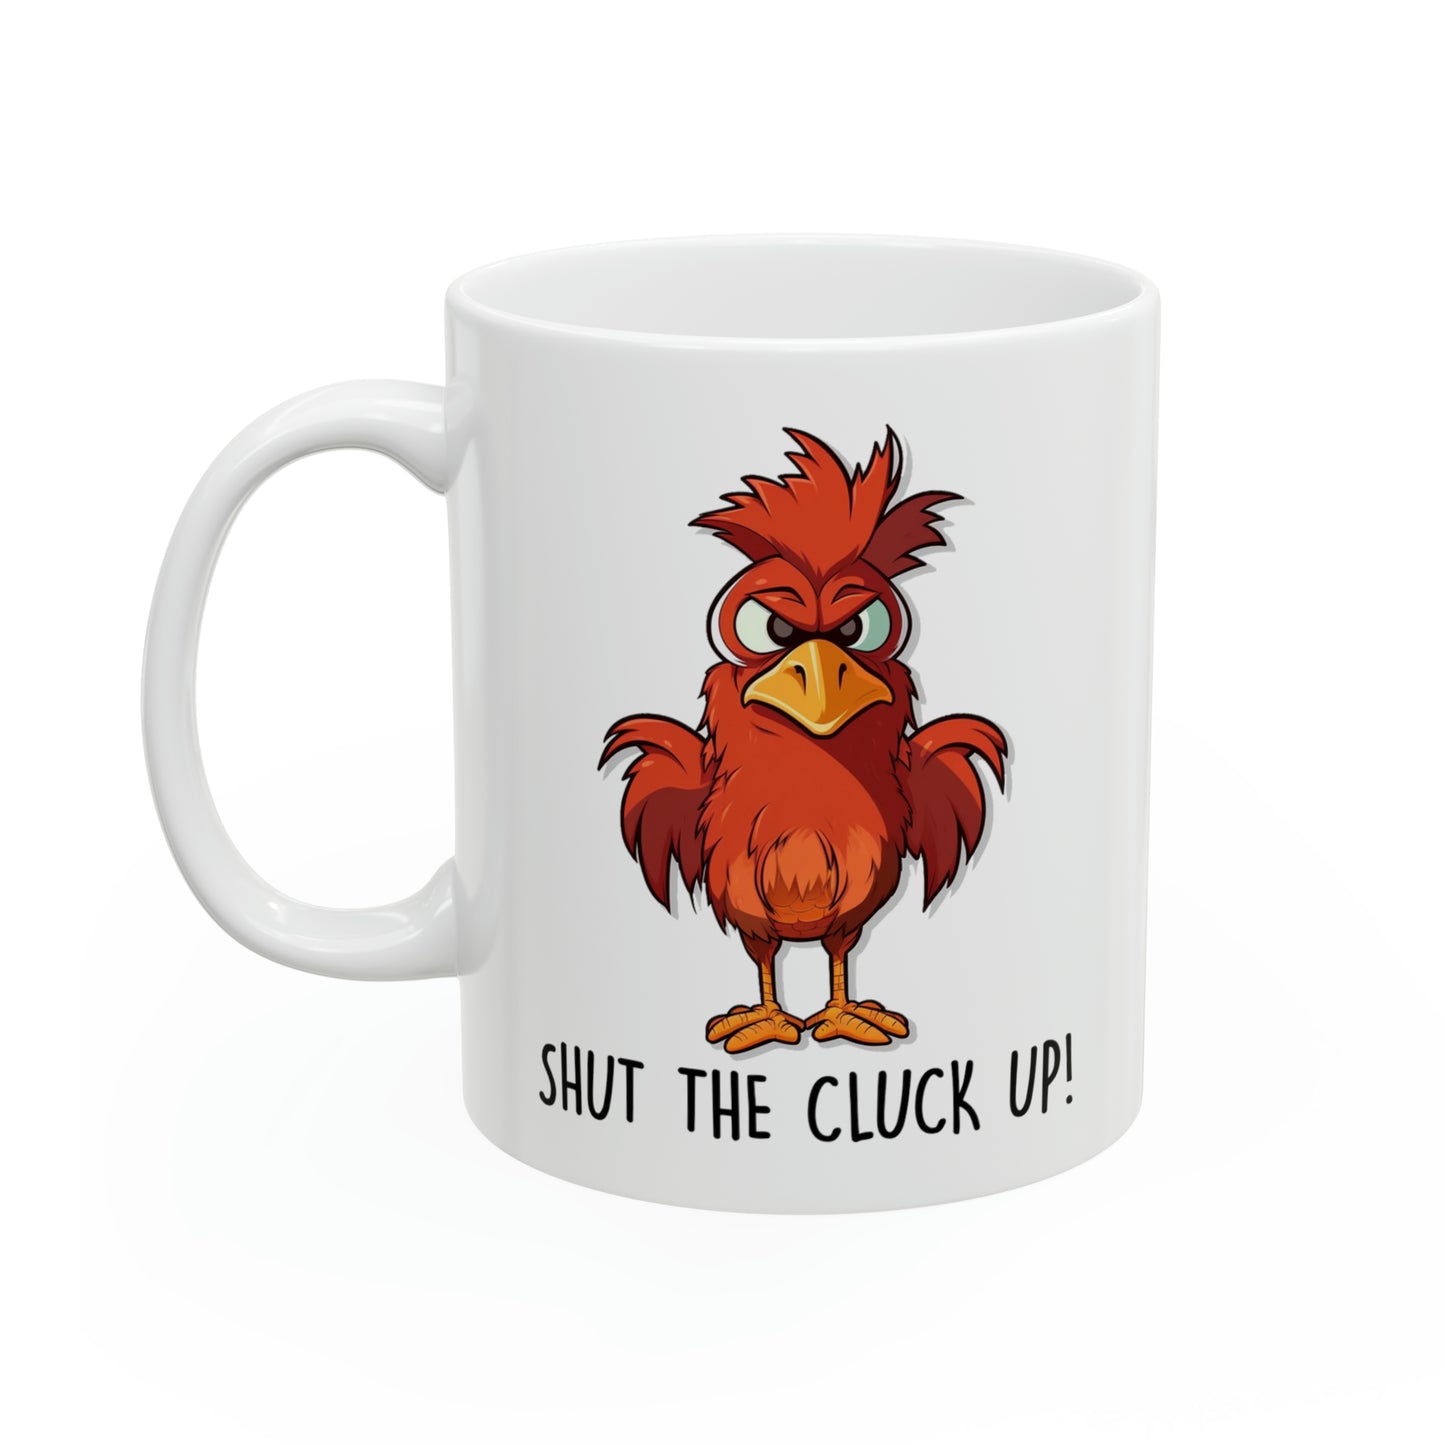 Cluckin' A Right!!! Set of Four Funny Cluckin Chicken Mugs!